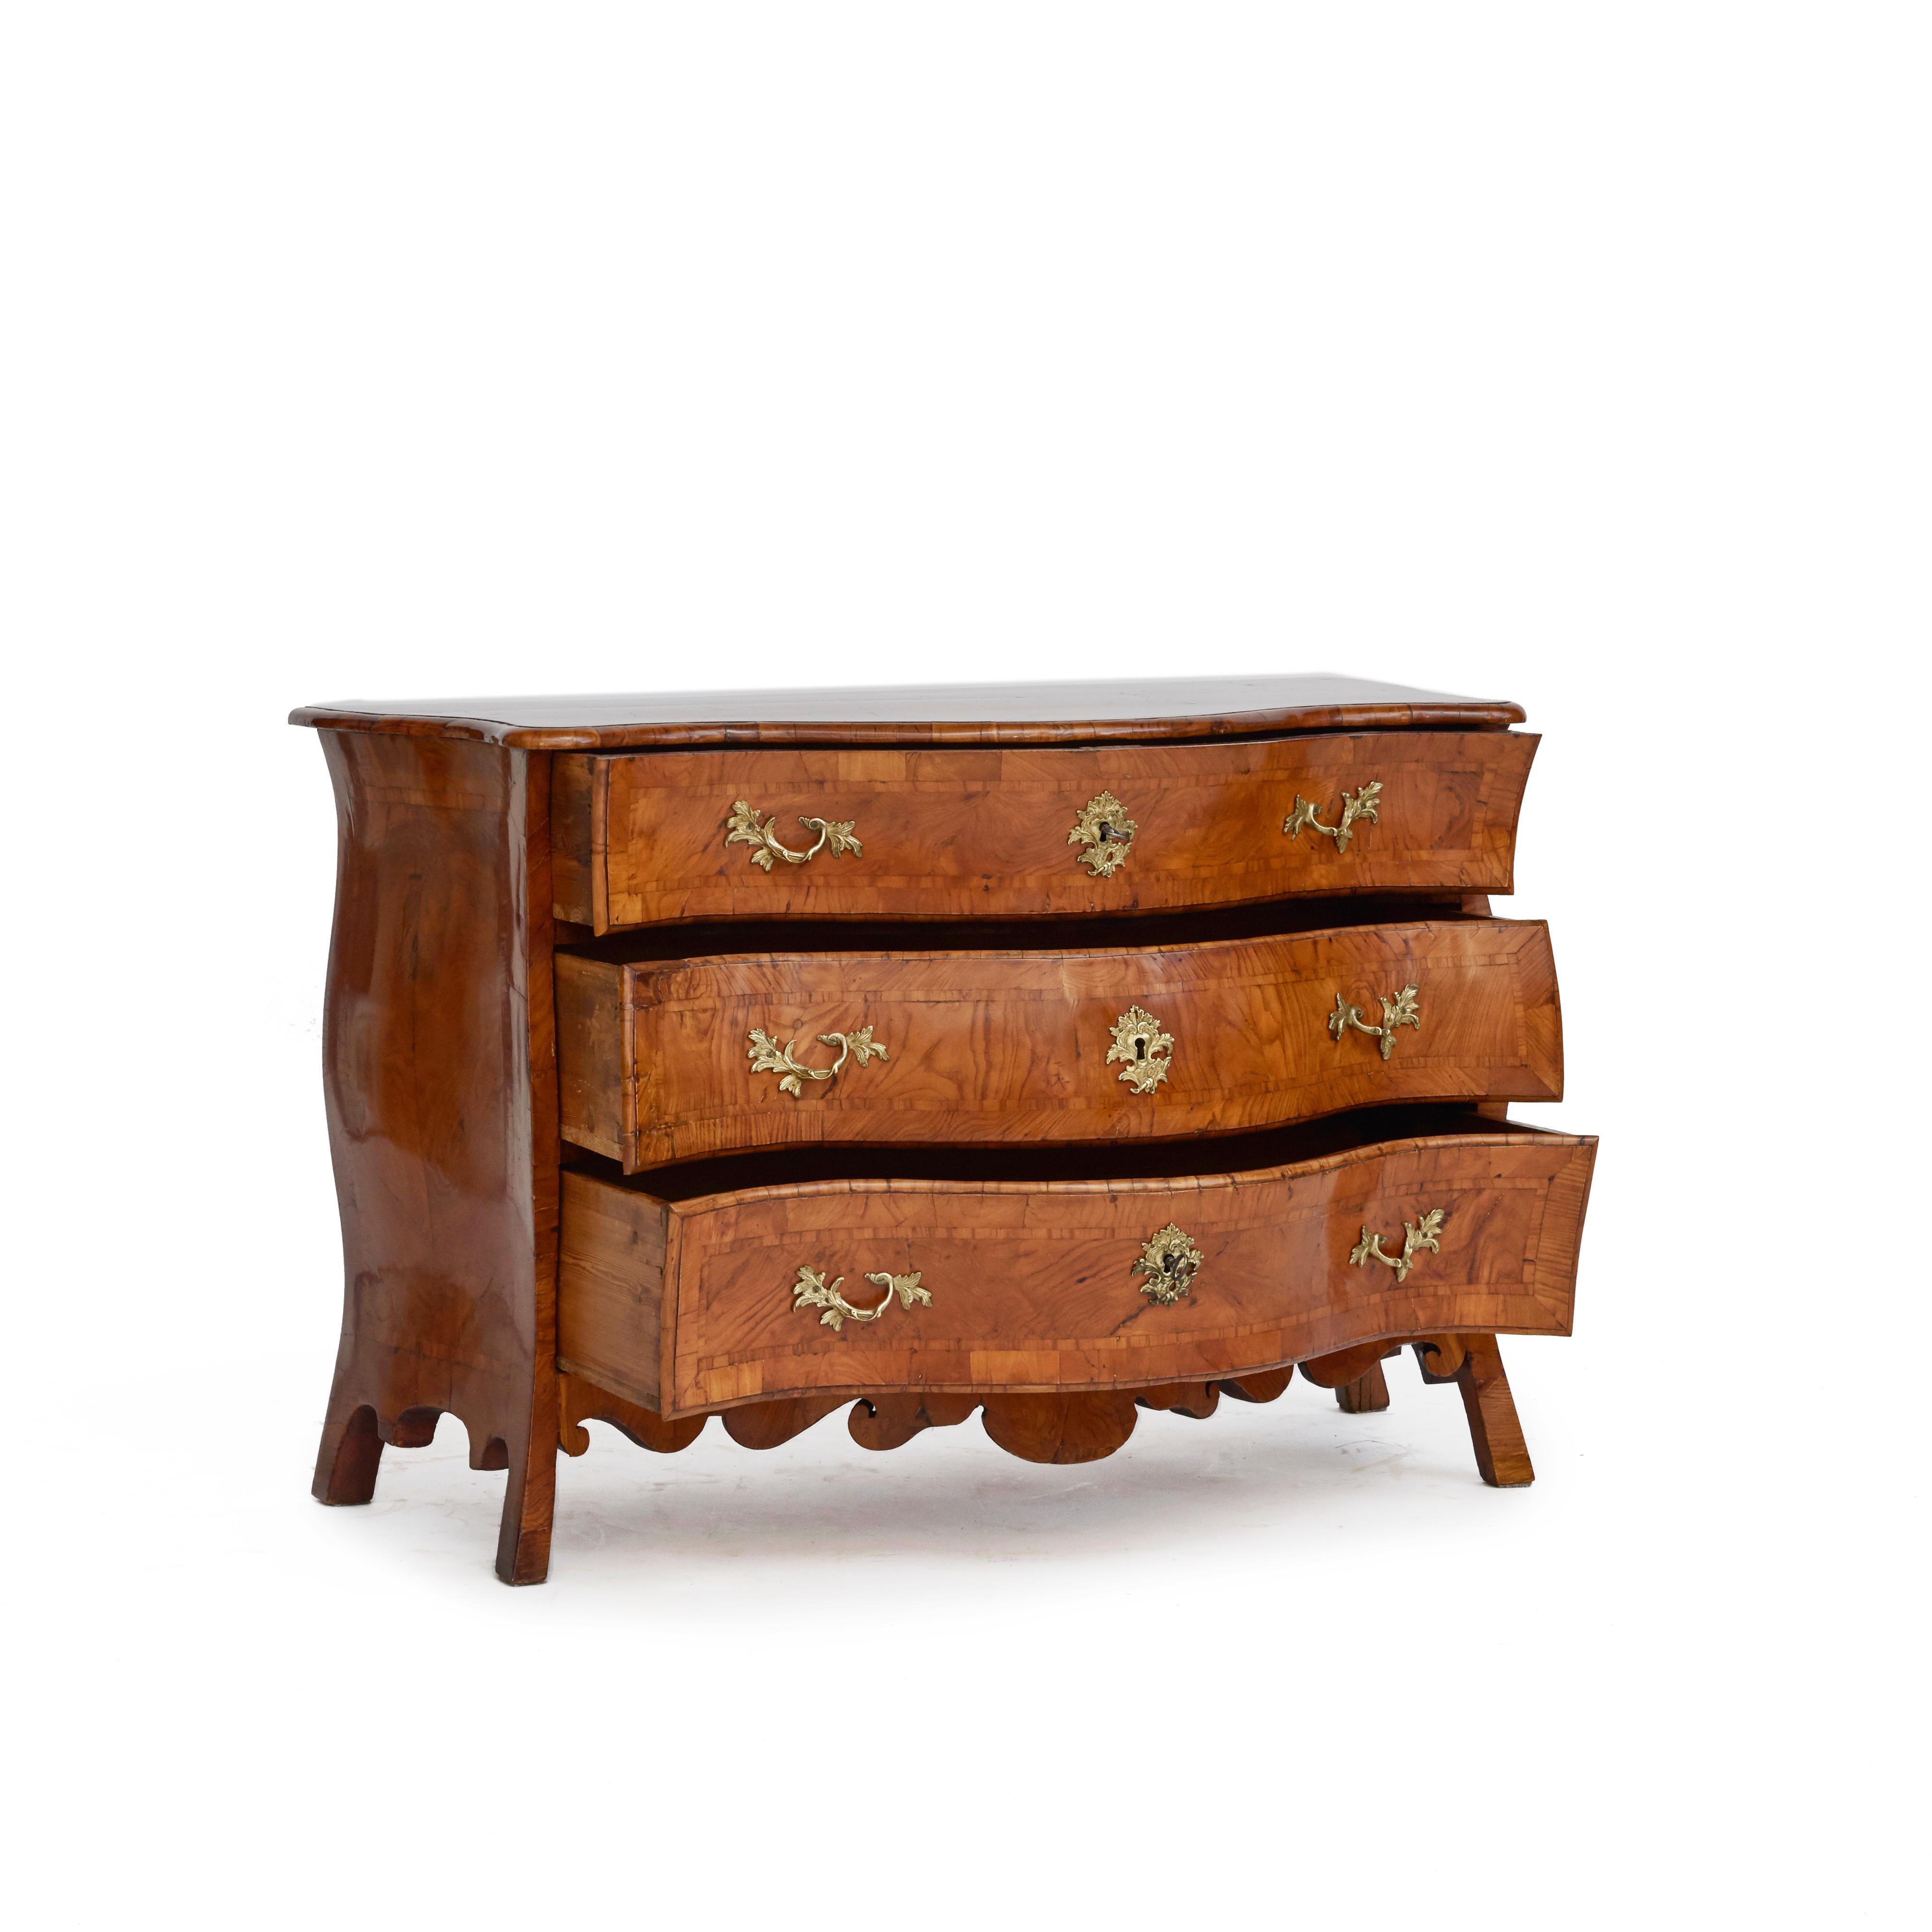 A Swedish rococo serpentine bombe commode or chest of drawers veneered in elm with a stunning grain.
Features three large drawers with original bronze fittings.
The beautiful rich color and patina has been enhanced with a sophisticated French